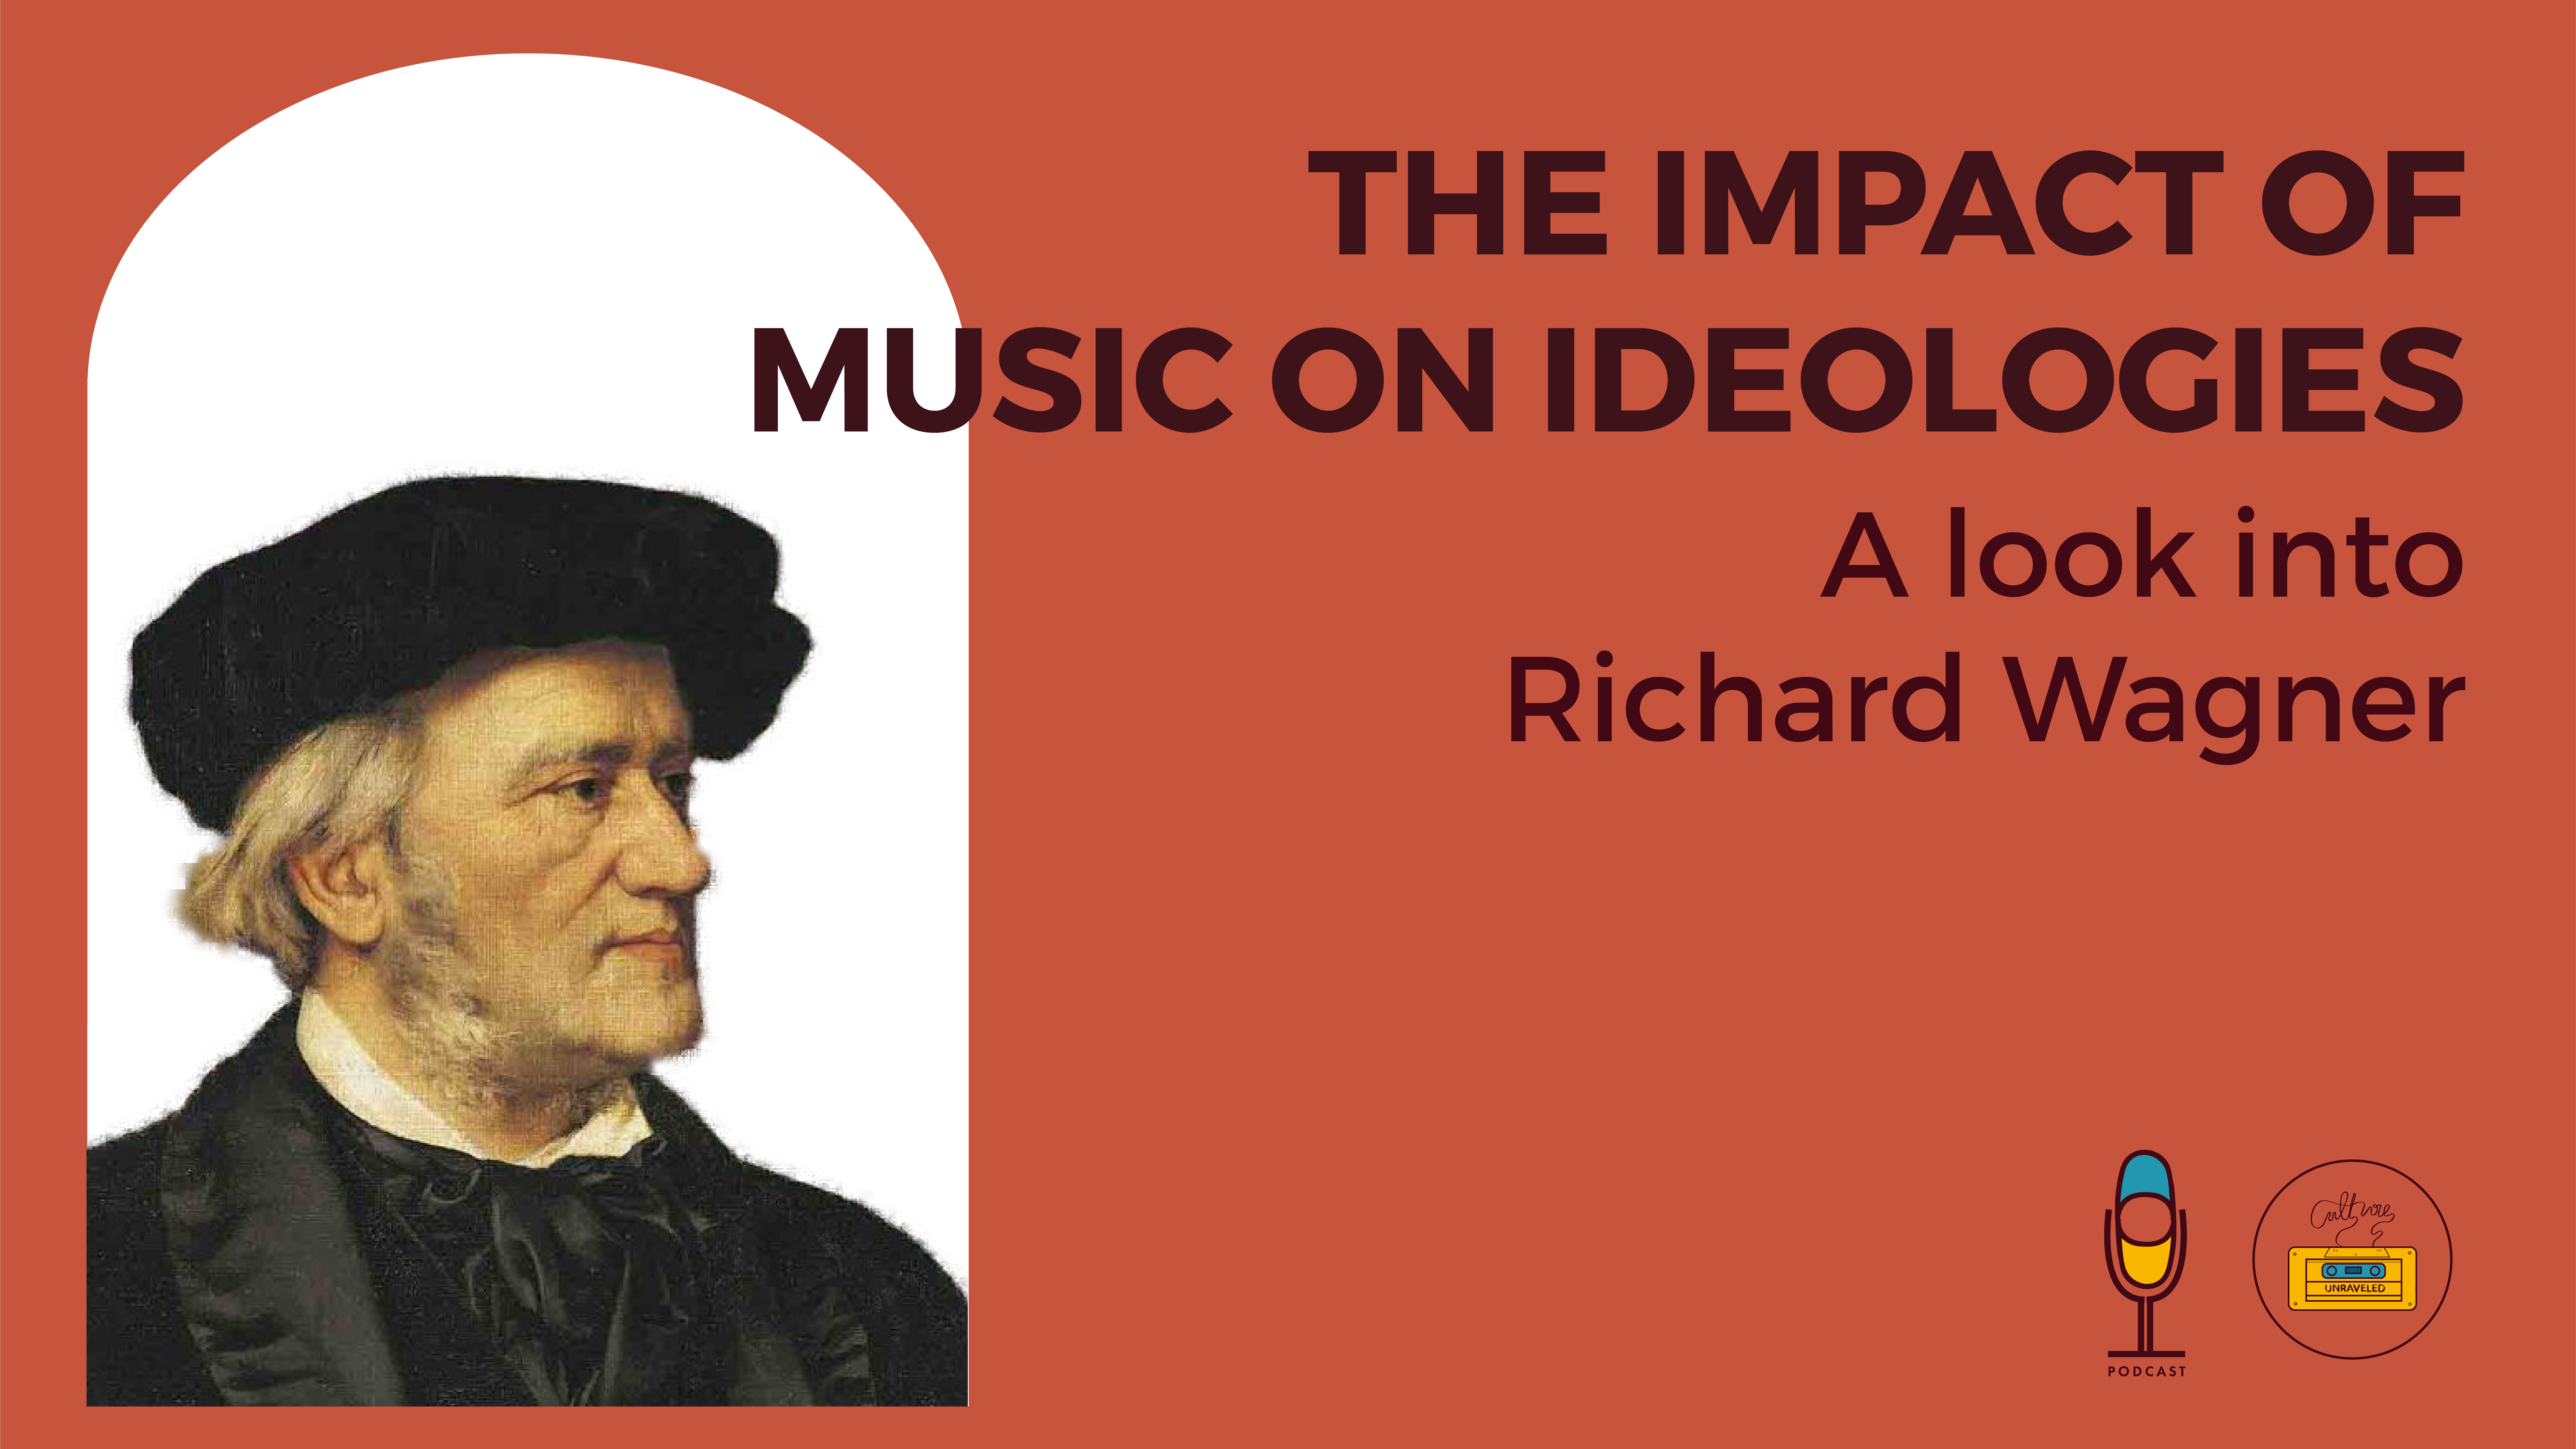 The Impact of Music on Ideologies. A Look into Richard Wagner